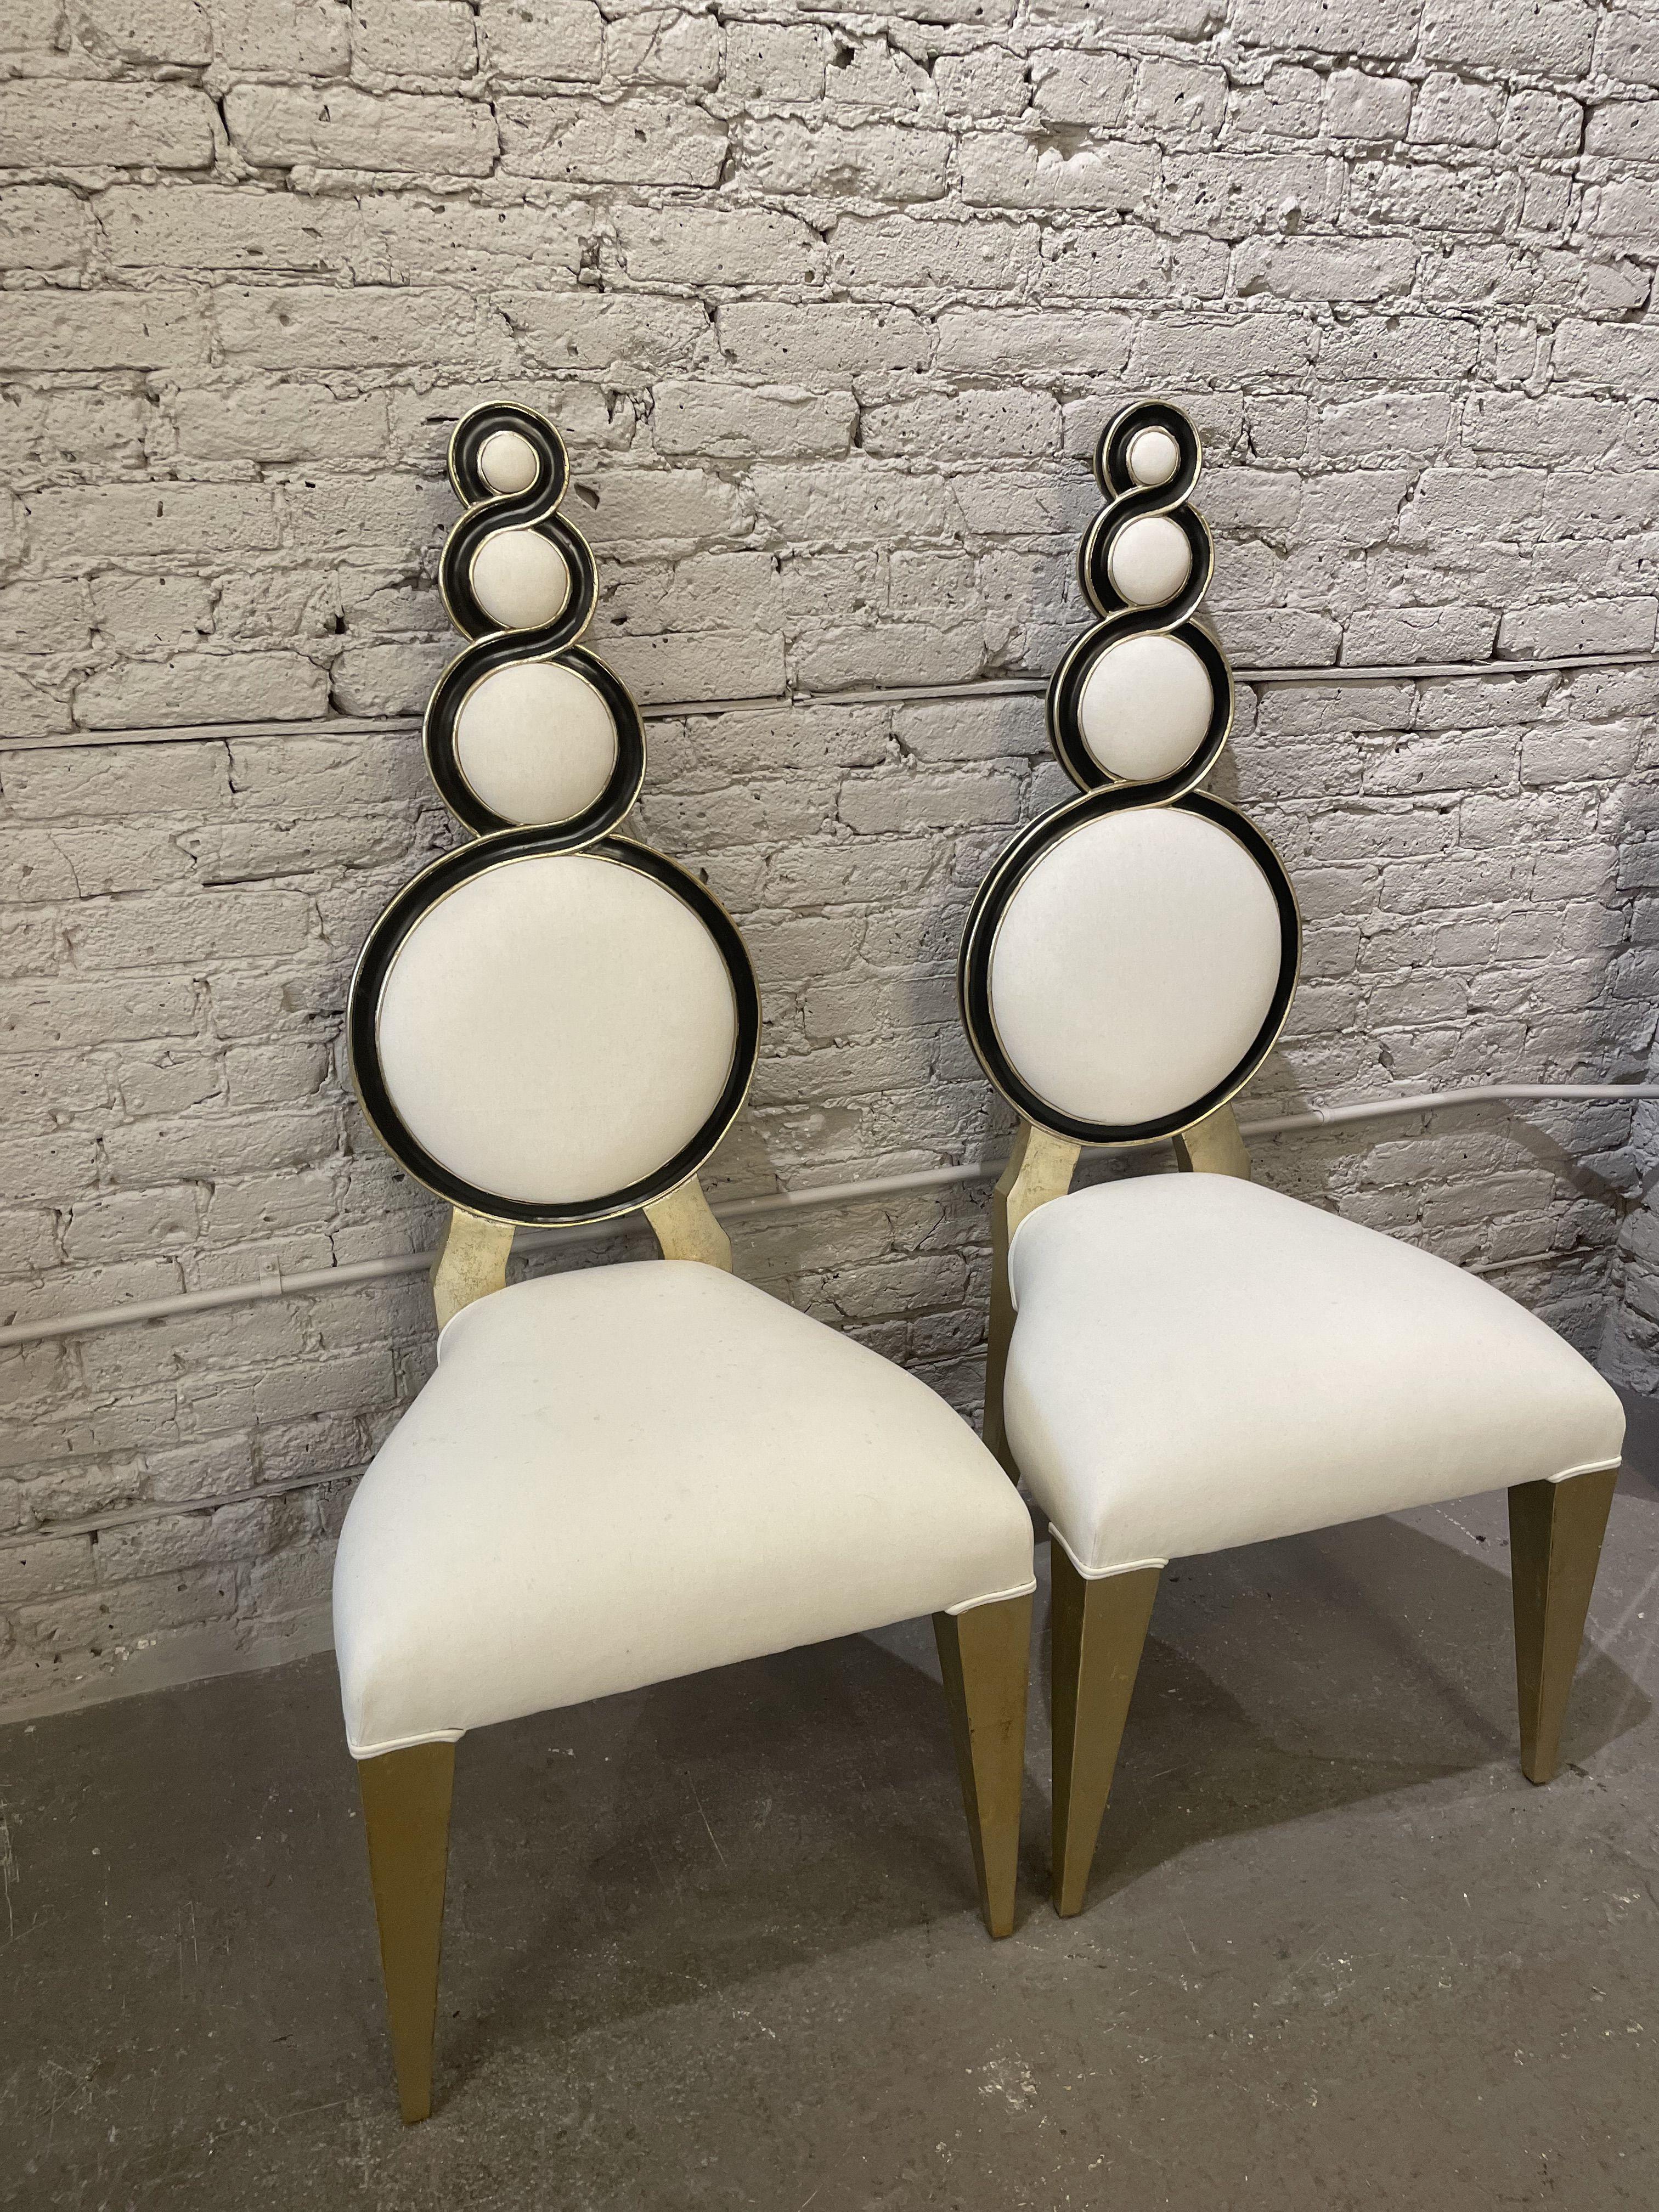 Hollywood Regency 1950s Side Chairs - a Pair For Sale